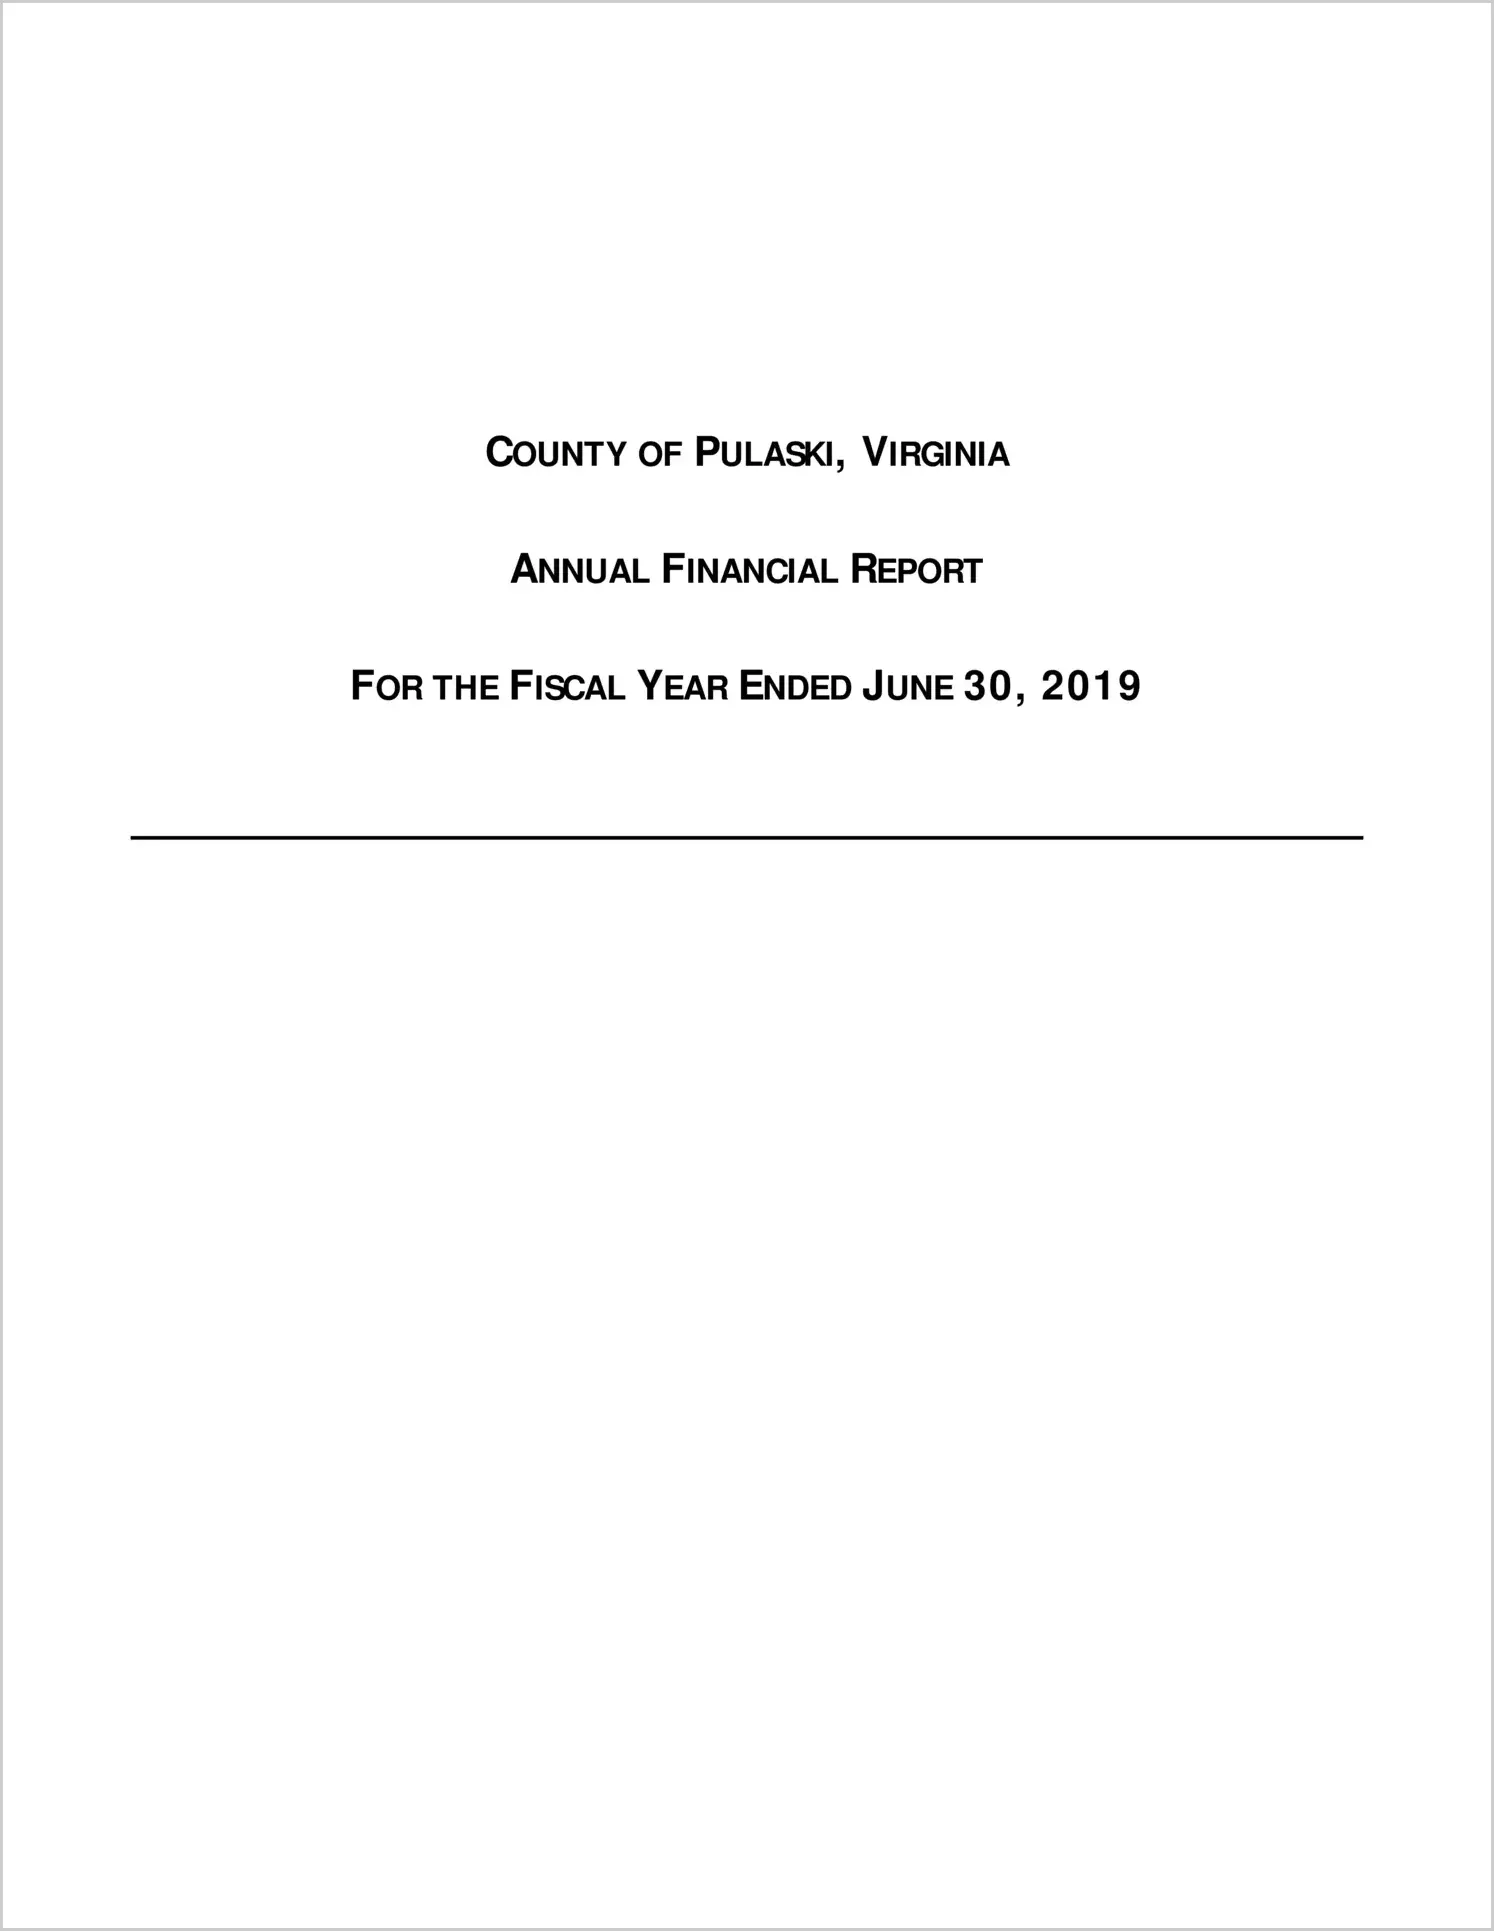 2019 Annual Financial Report for County of Pulaski